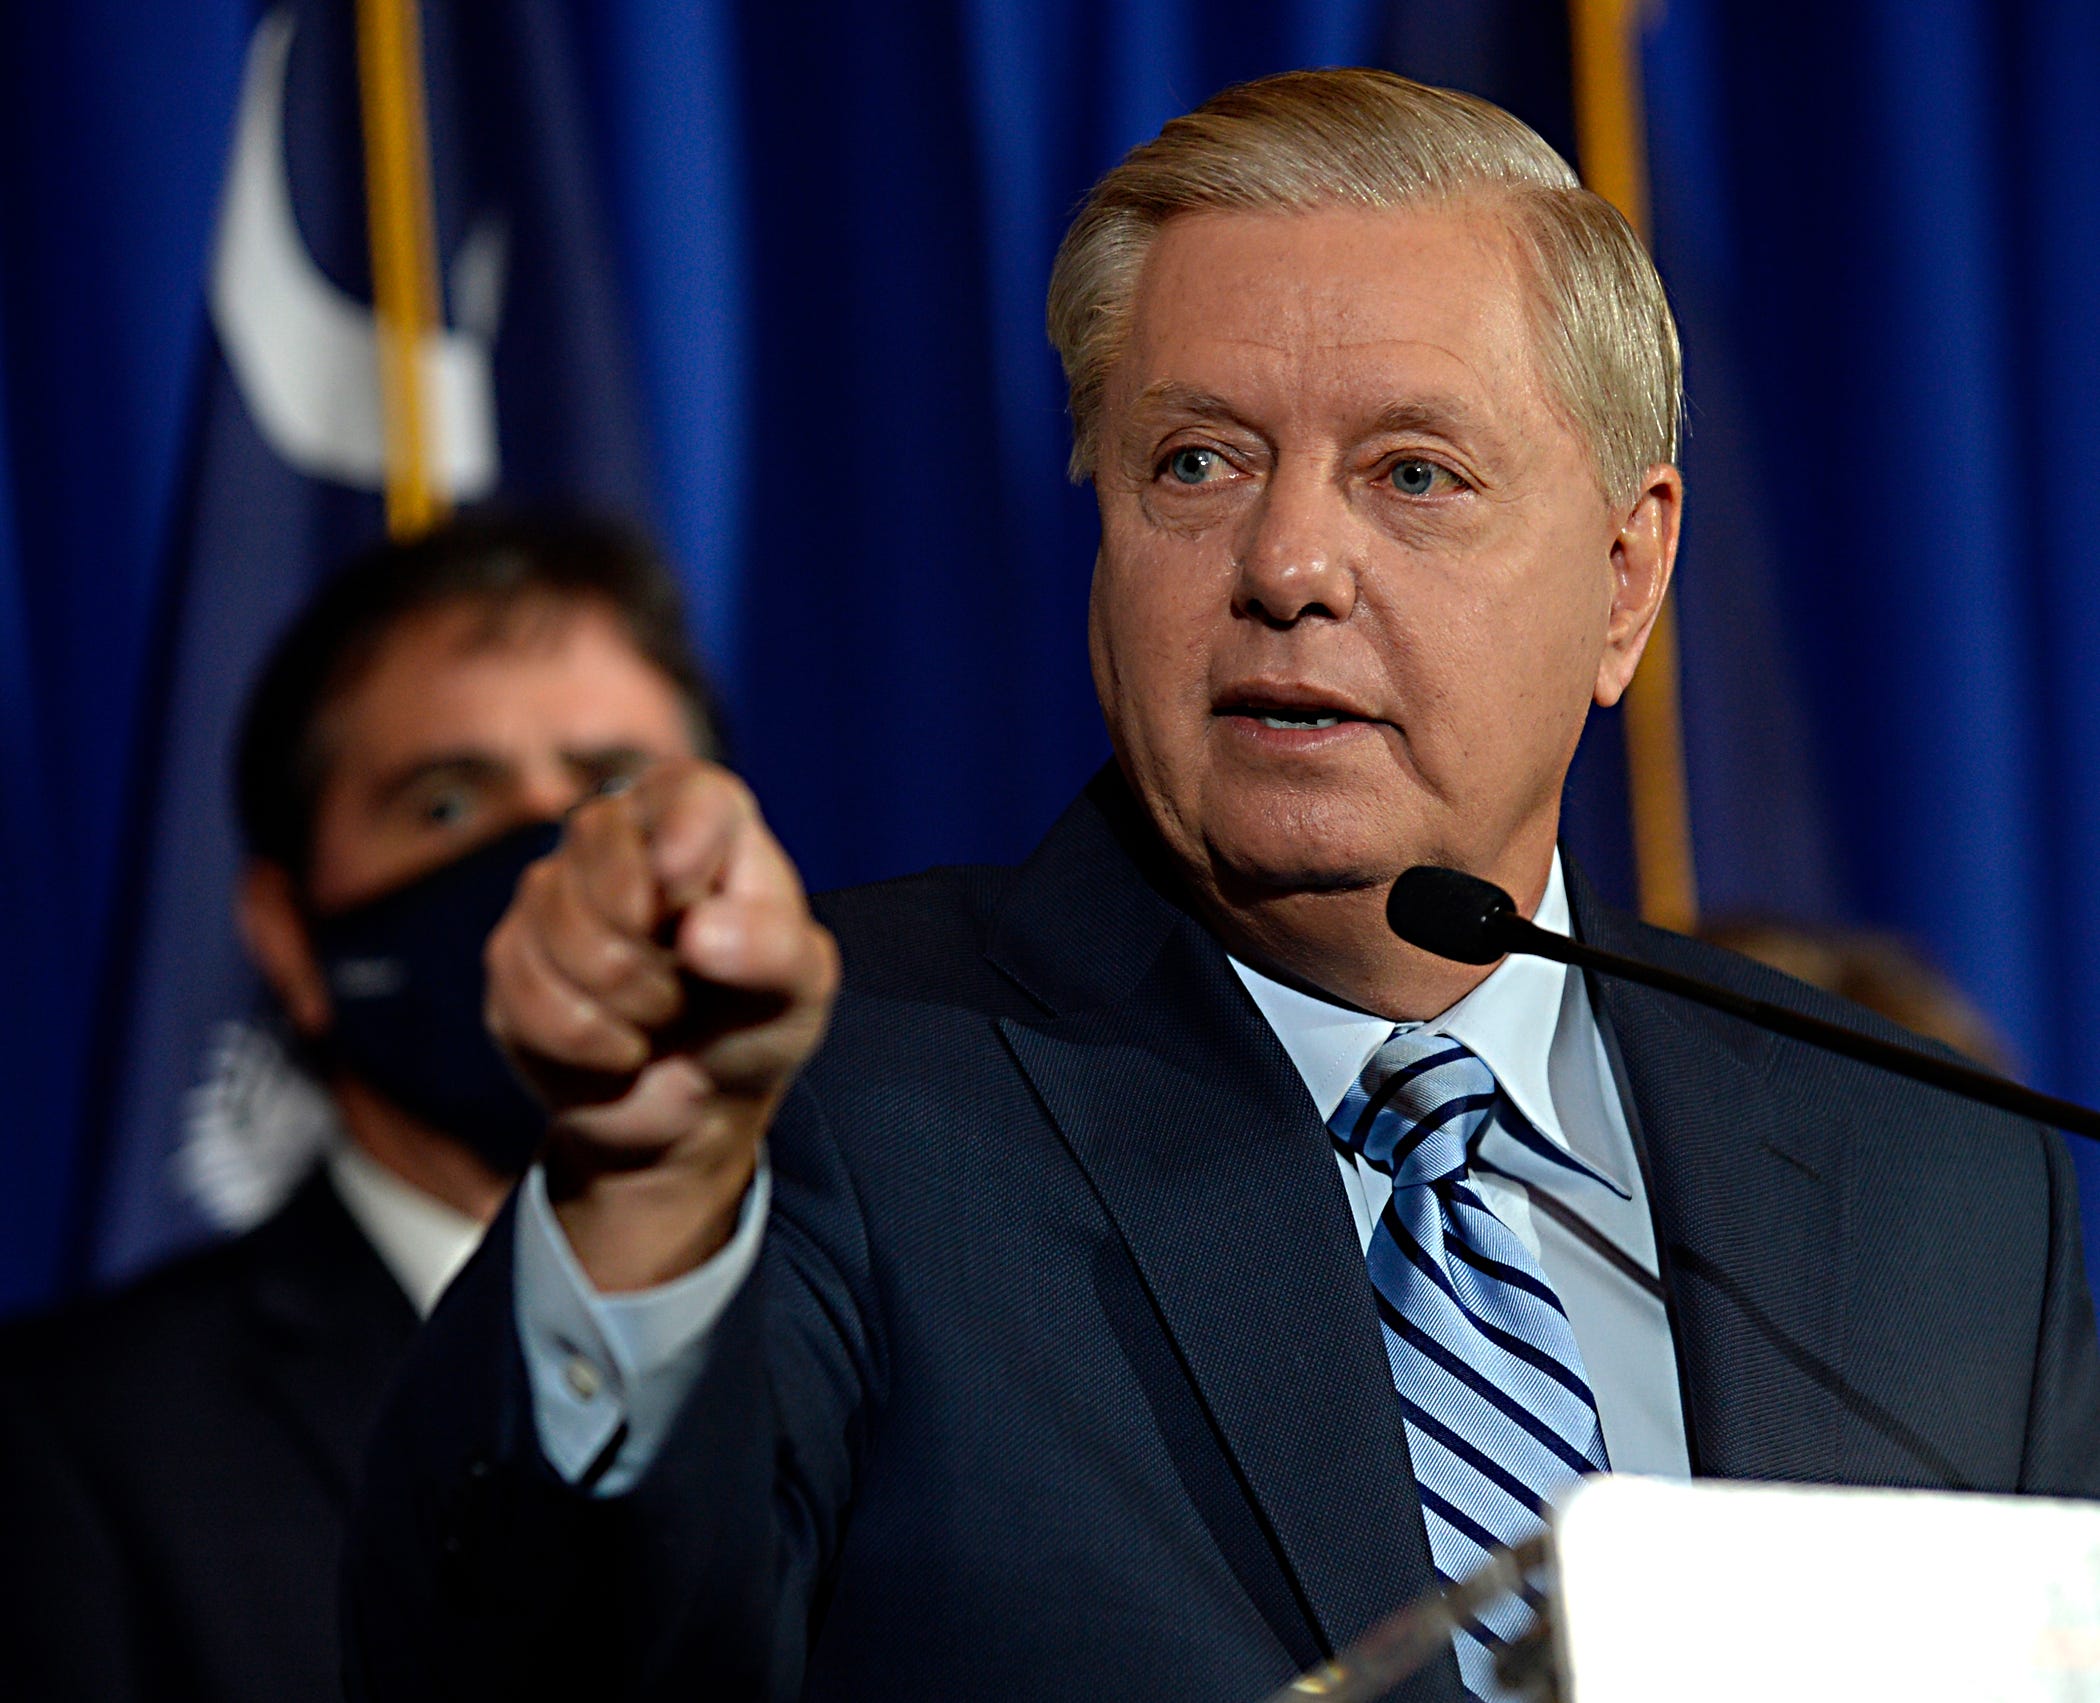 Fact check: Claim about Lindsey Graham's calls to states is misleading